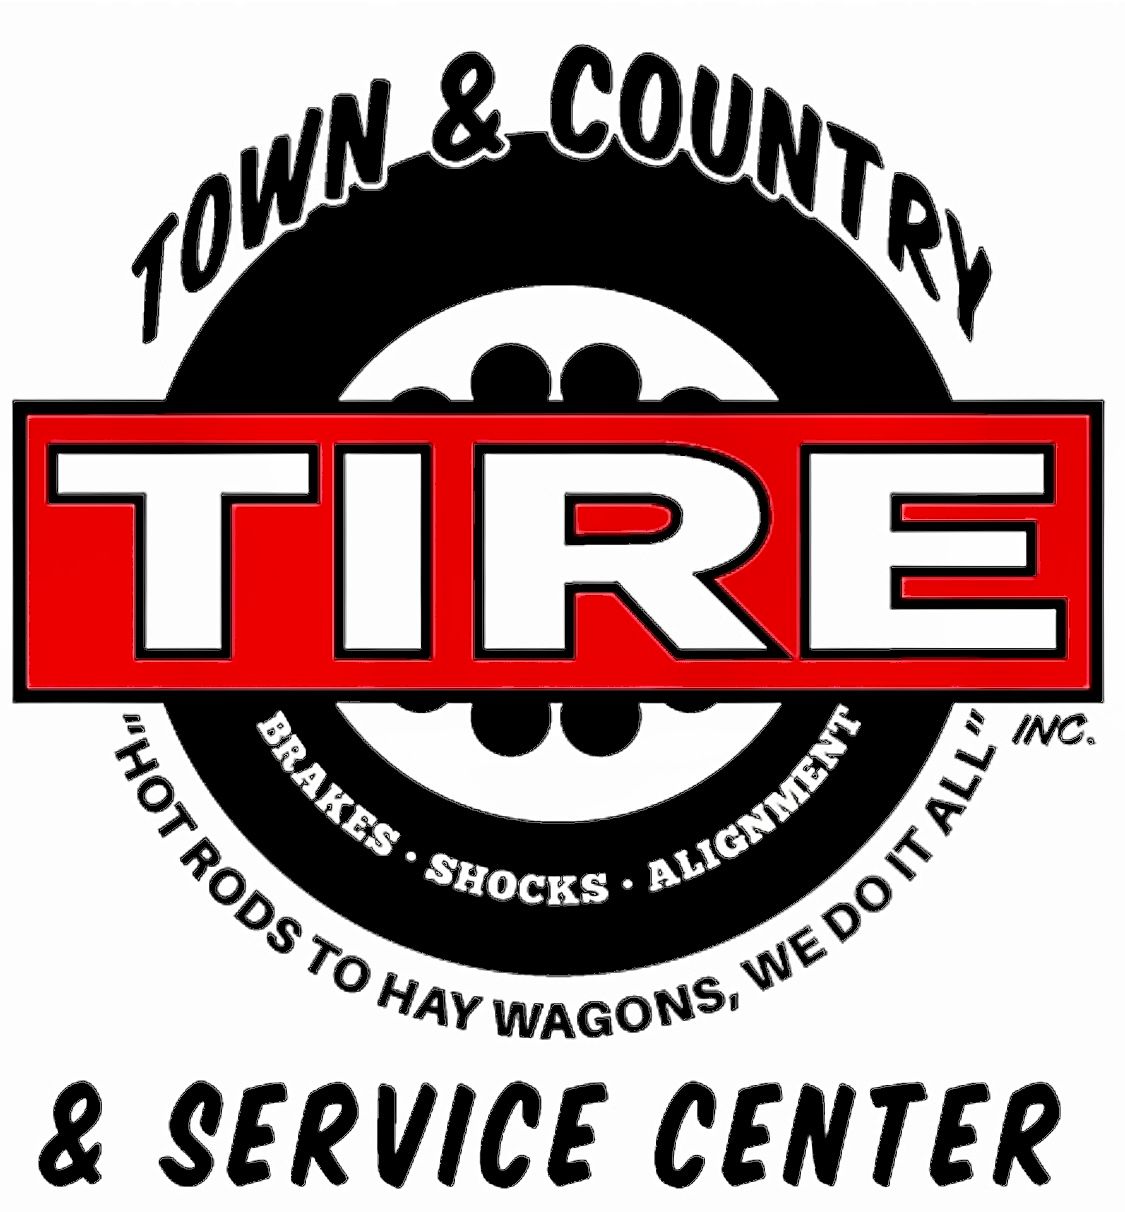 Town & Country Tire, Inc